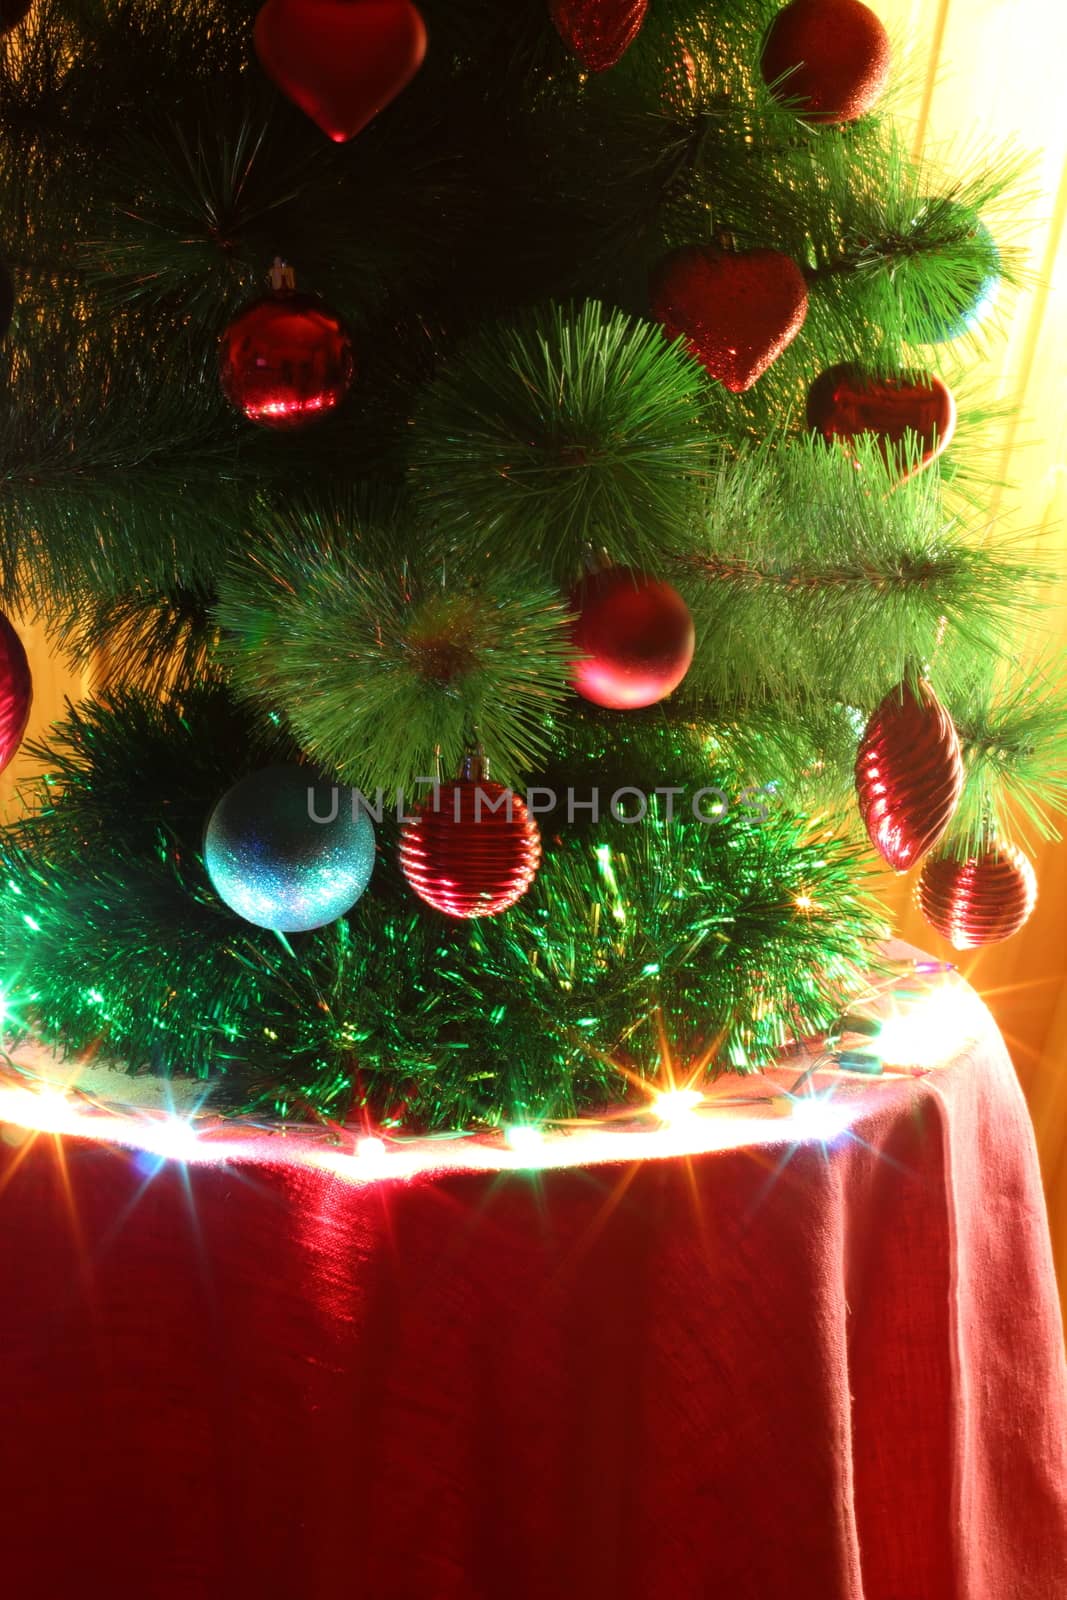 Christmas tree decorated with red and blue toy with a star on top